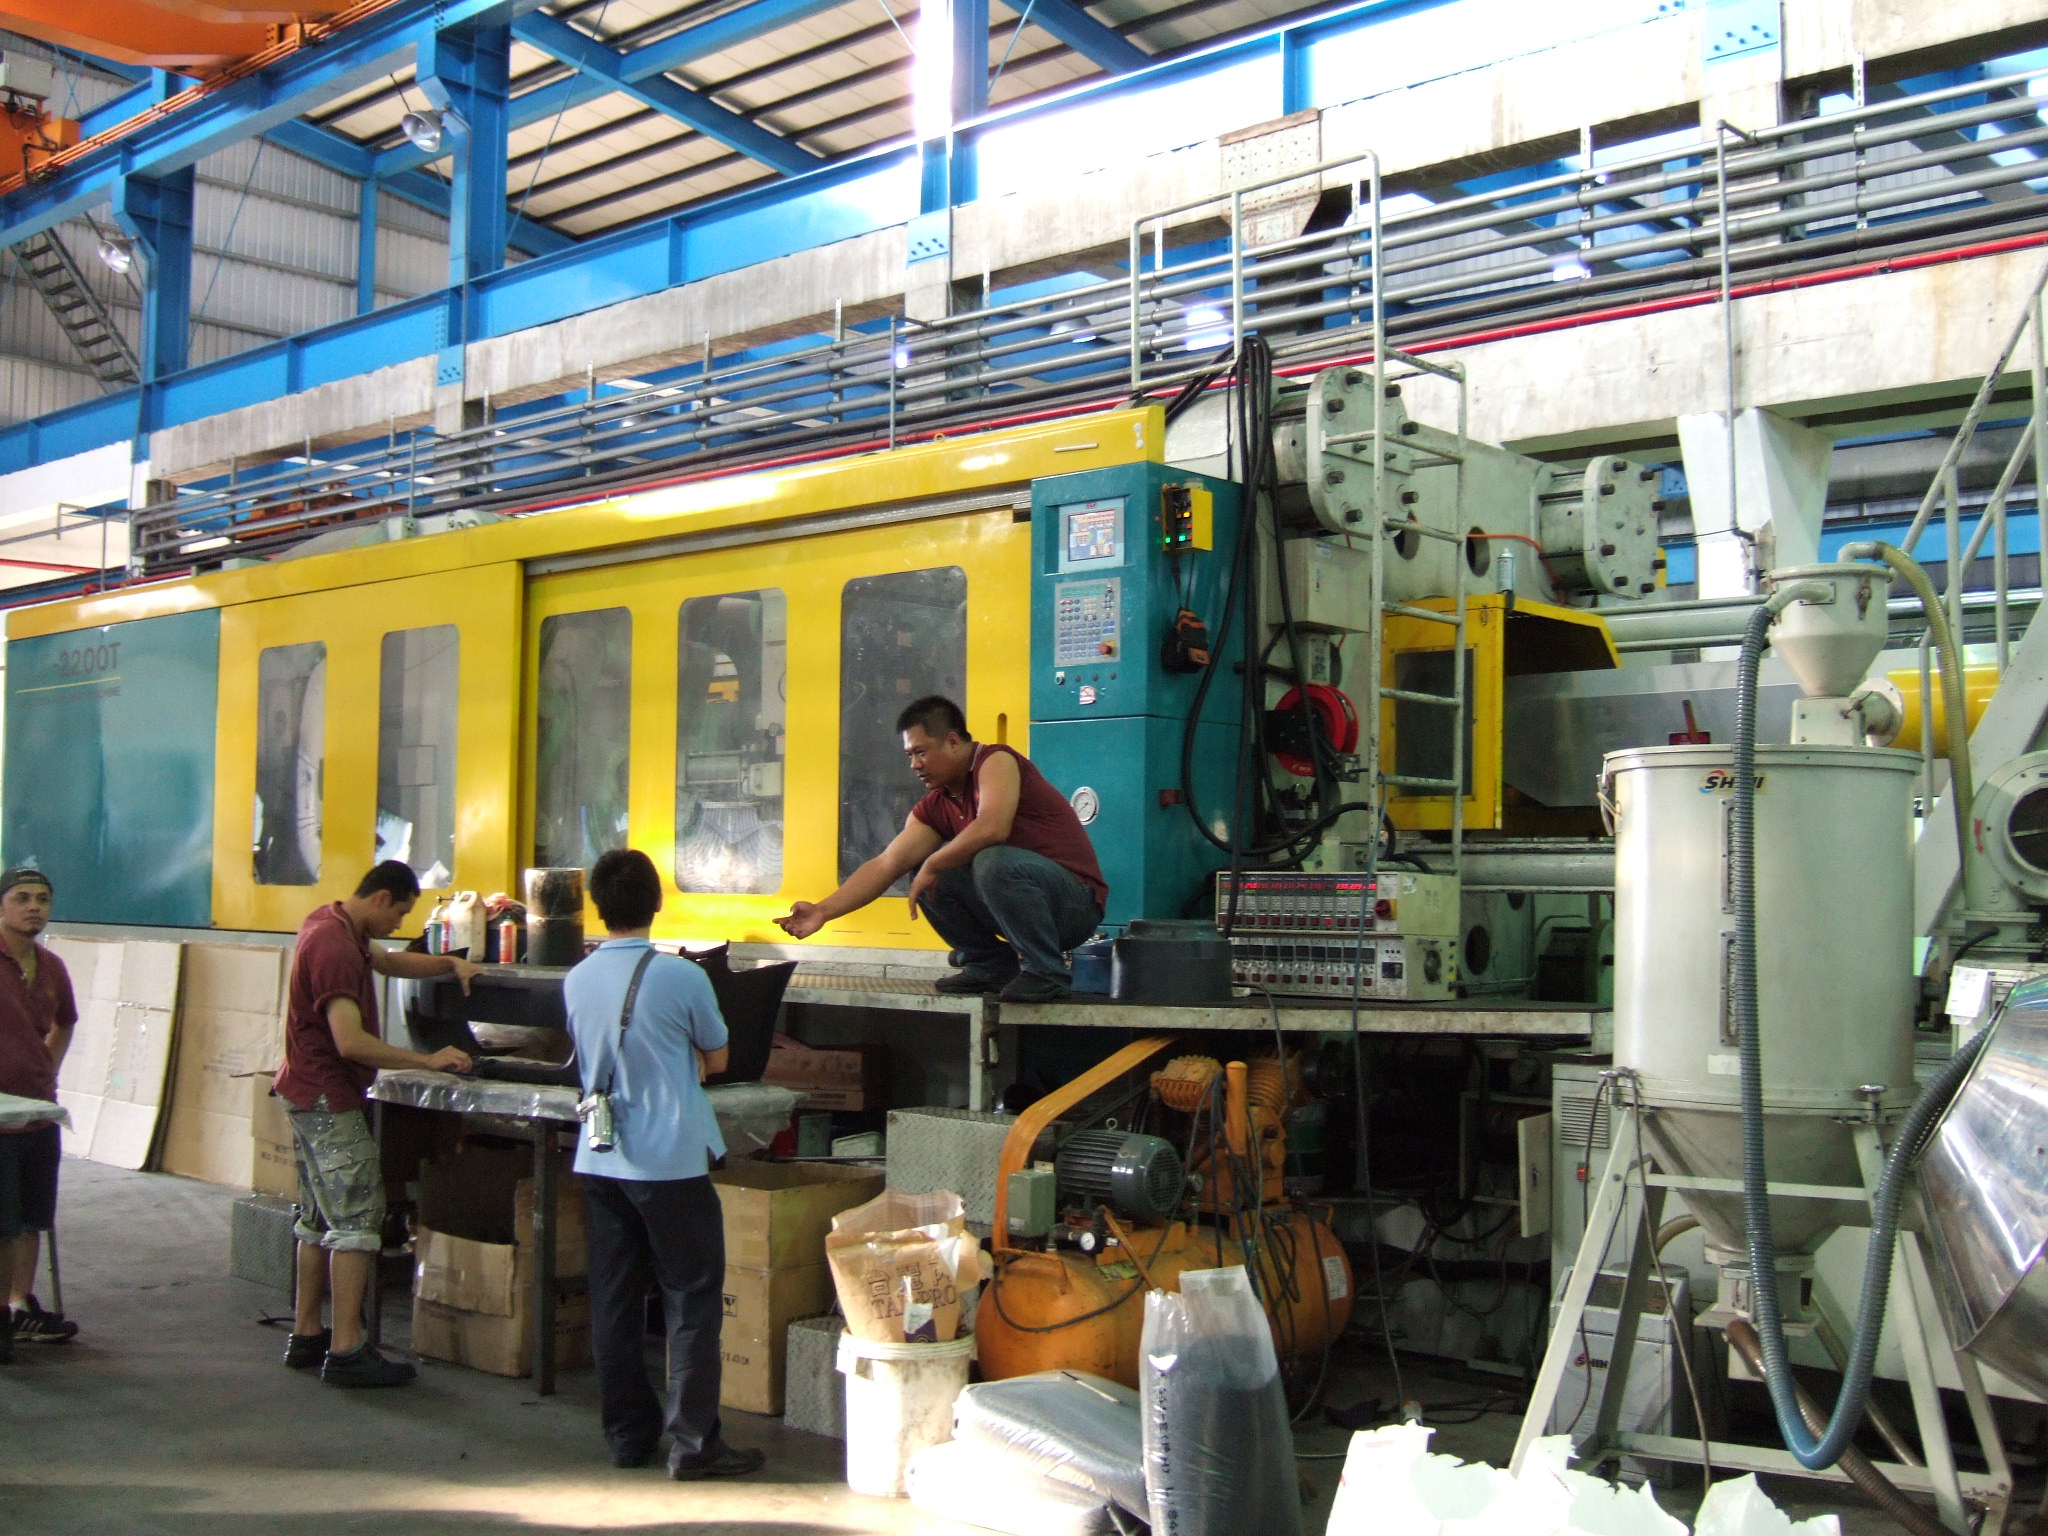 One of the Intertech’s factories for molding injection